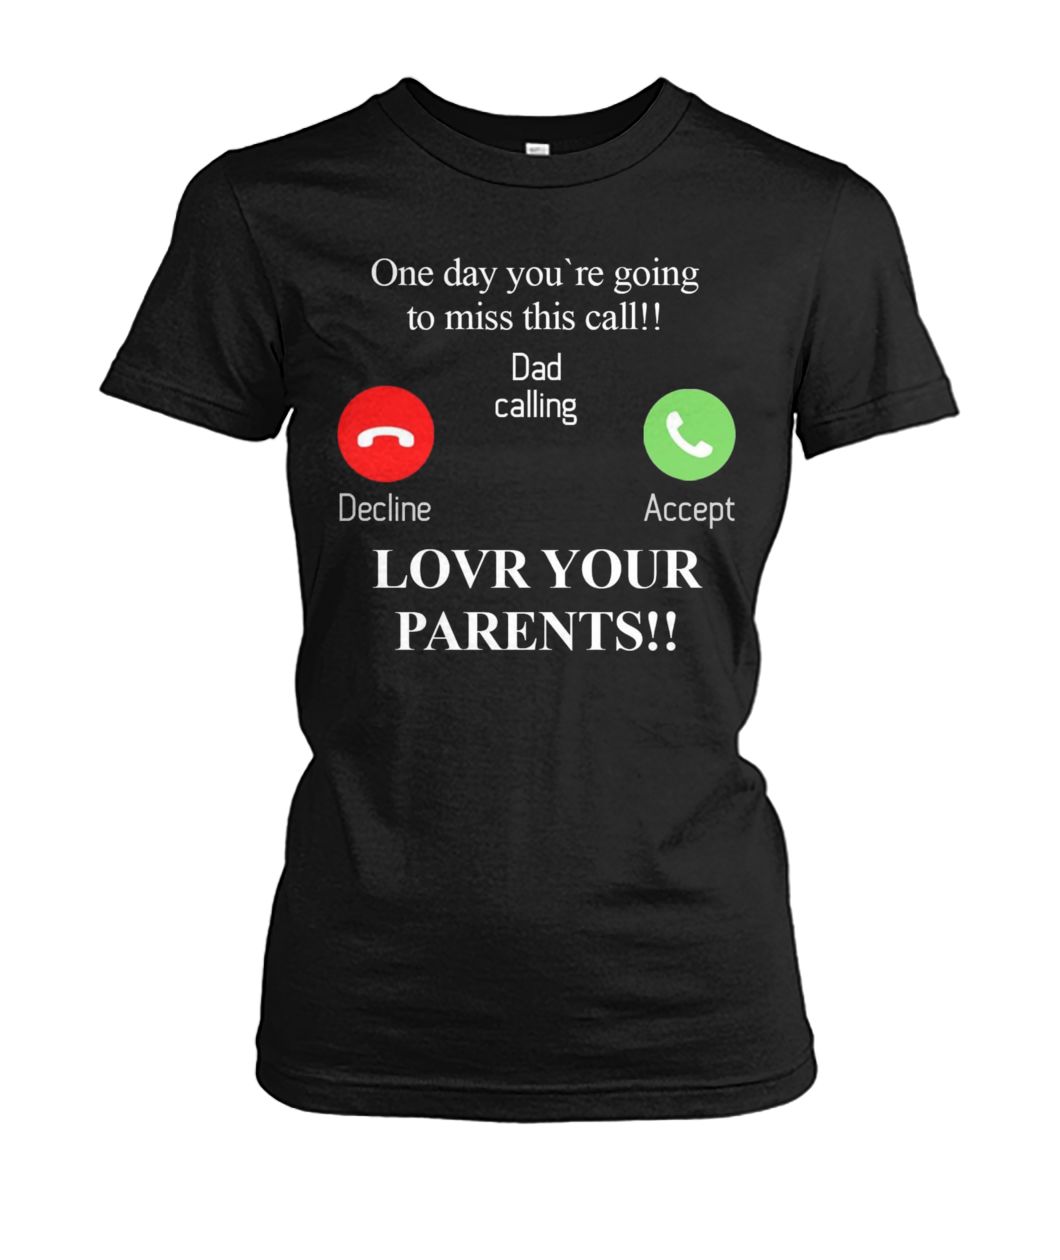 One day you're going to miss this call dad calling women's crew tee